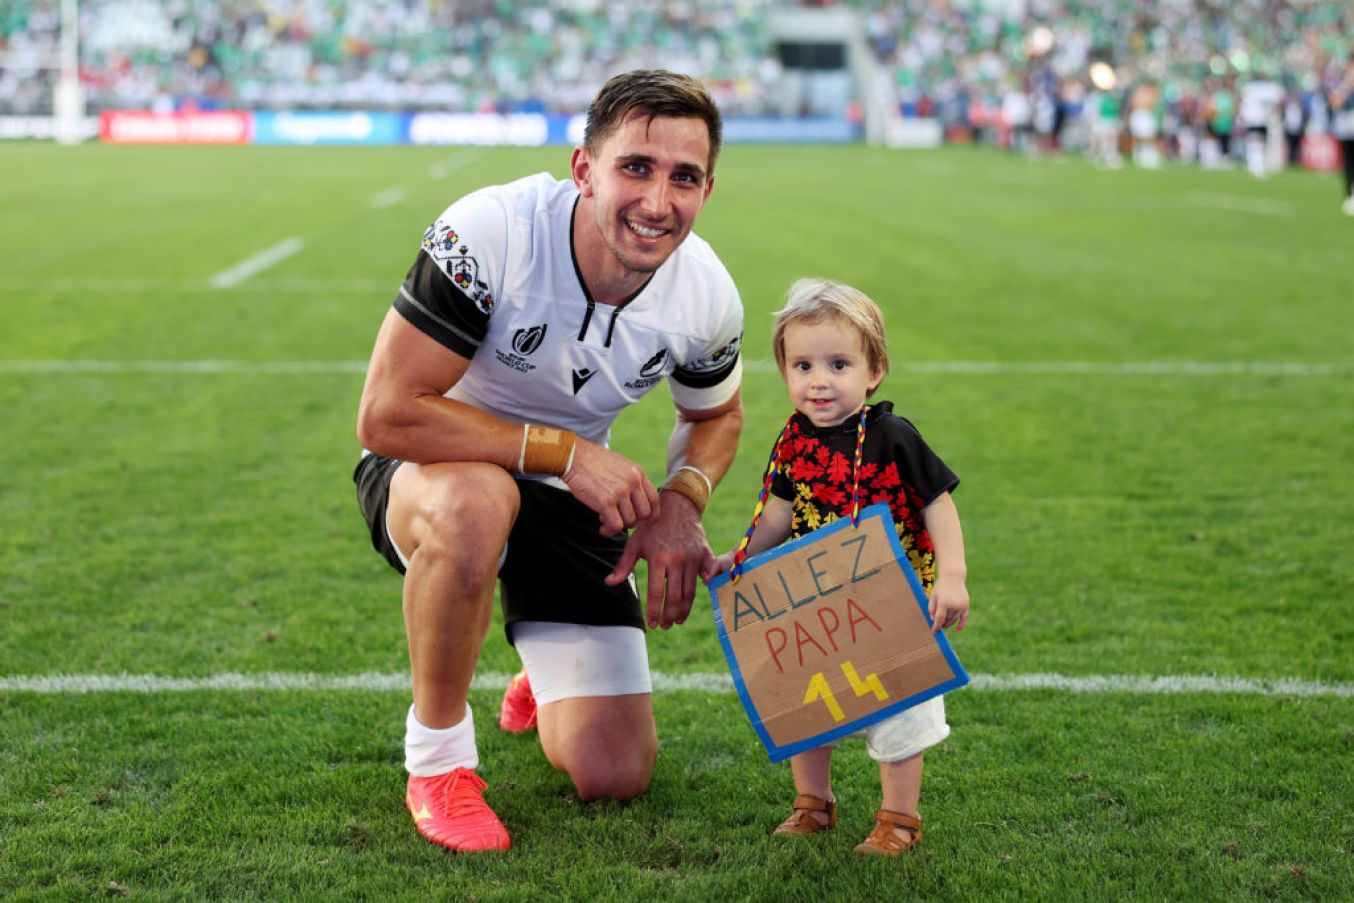 Romania's Nicholas Onutu With His Child After The Ireland Game. Photo: Getty